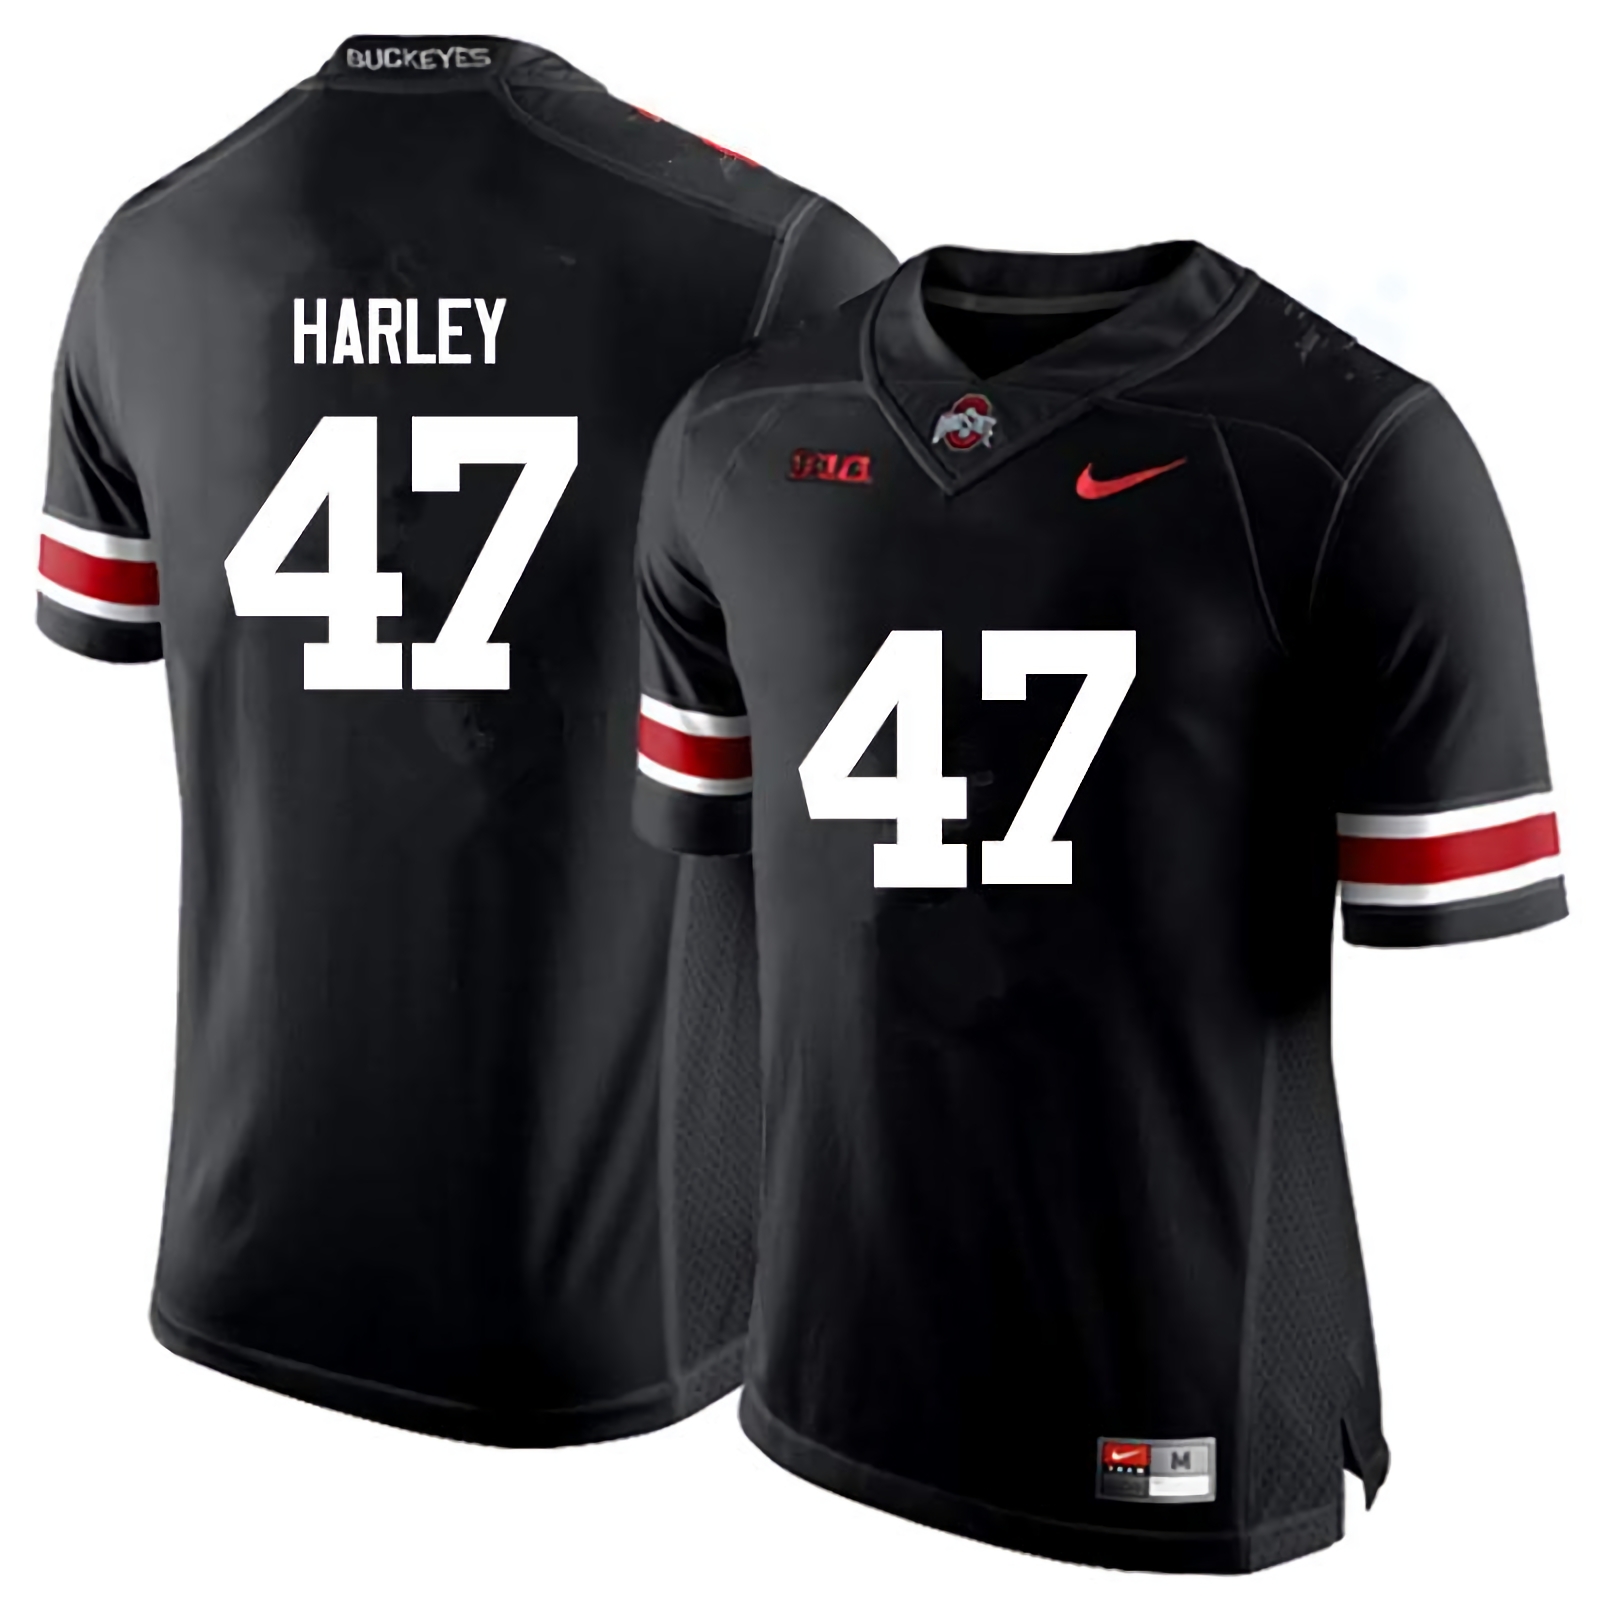 Chic Harley Ohio State Buckeyes Men's NCAA #47 Nike Black College Stitched Football Jersey TOO3756HT